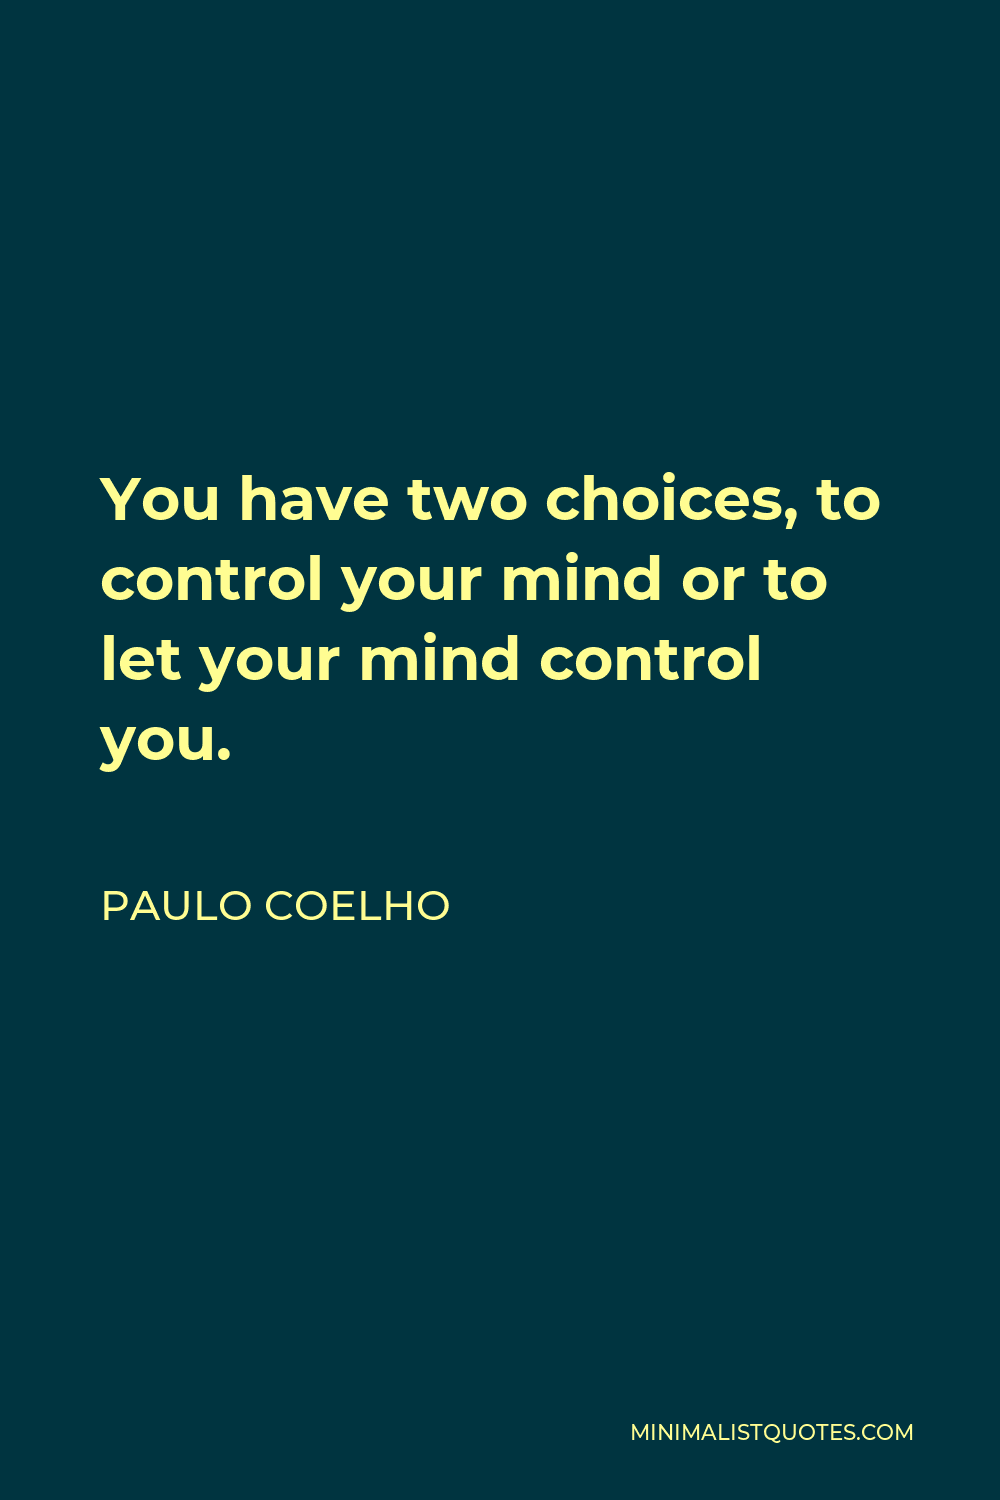 Paulo Coelho Quote: You have two choices, to control your mind or to let your  mind control you.